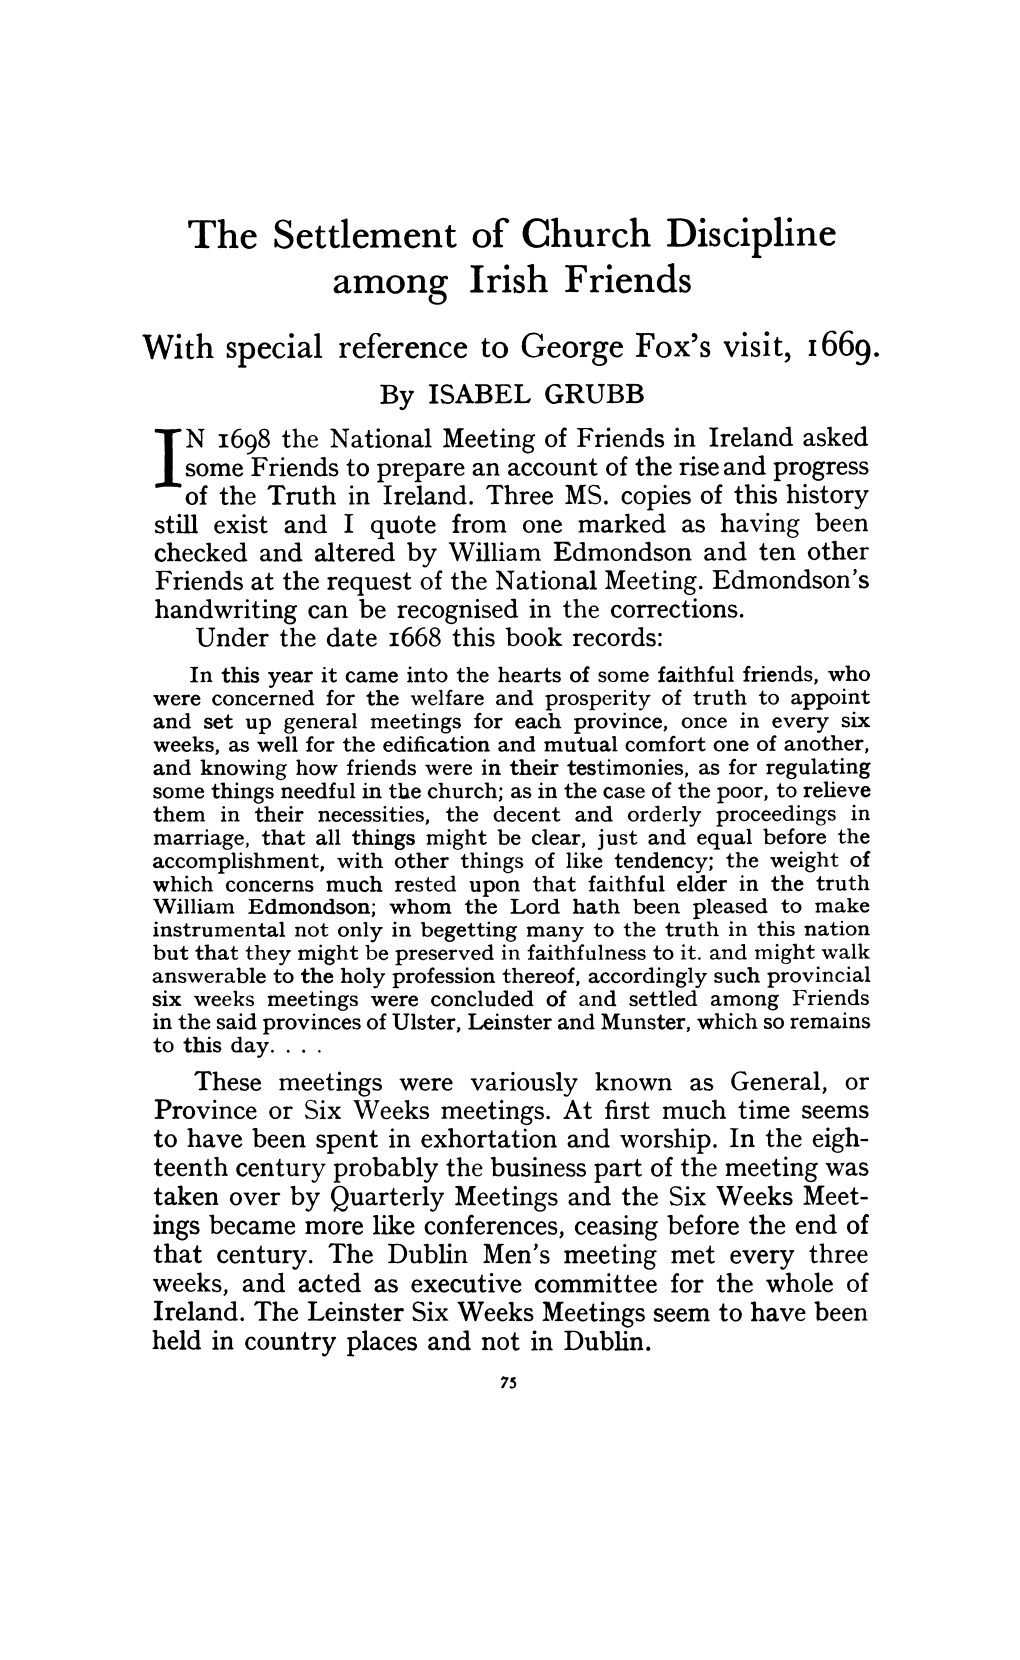 The Settlement of Church Discipline Among Irish Friends with Special Reference to George Fox's Visit, 1669